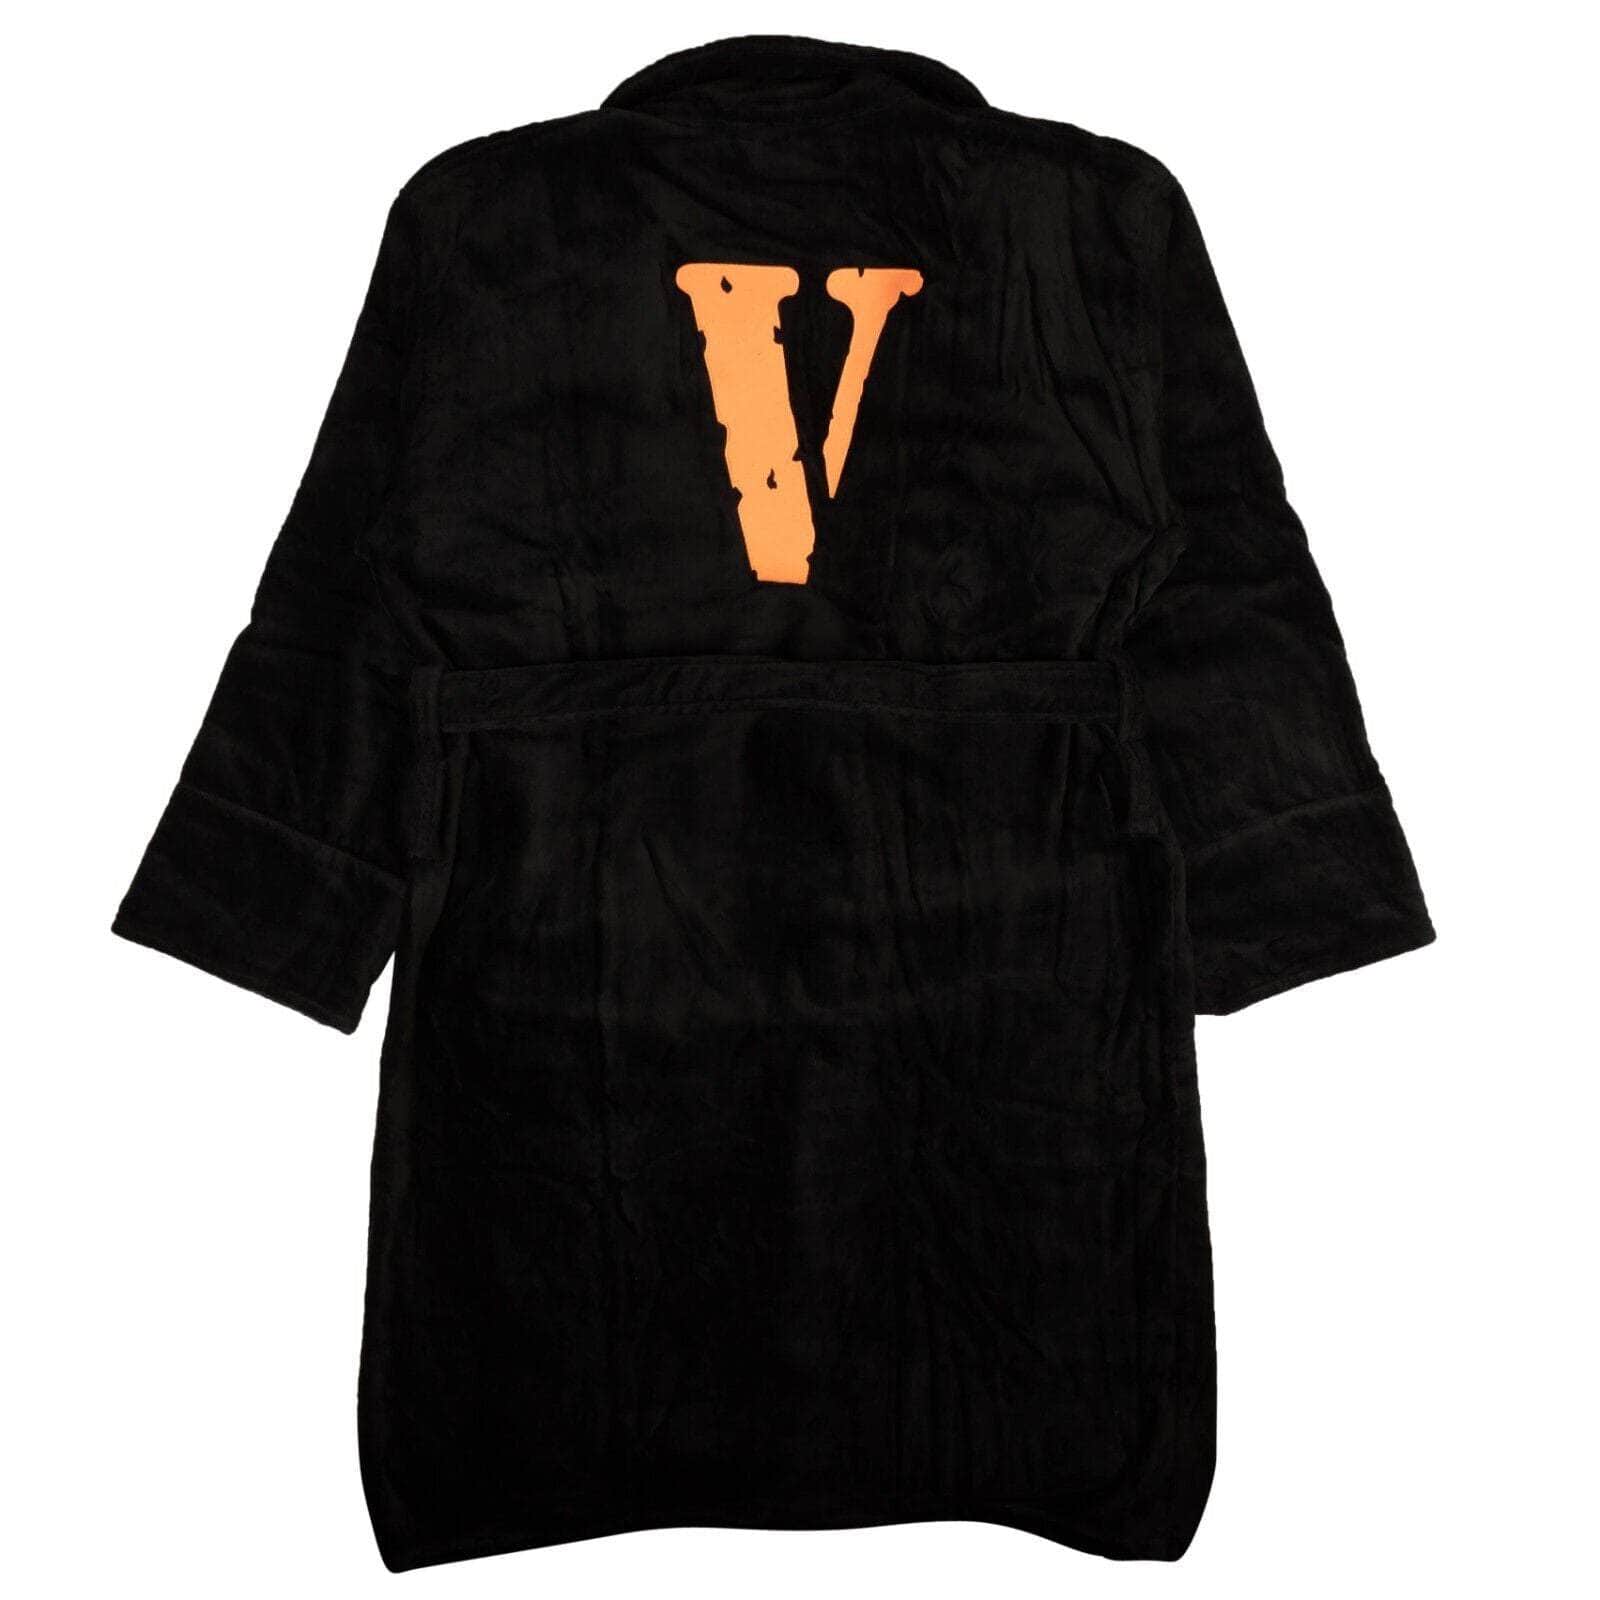 Vlone 2000-5000, channelenable-all, chicmi, couponcollection, gender-mens, main-clothing, mens-shoes, mens-sleepwear-robes, size-os, vlone OS Black And Orange Logo Terry Bathrobe 95-VLN-0001/OS 95-VLN-0001/OS